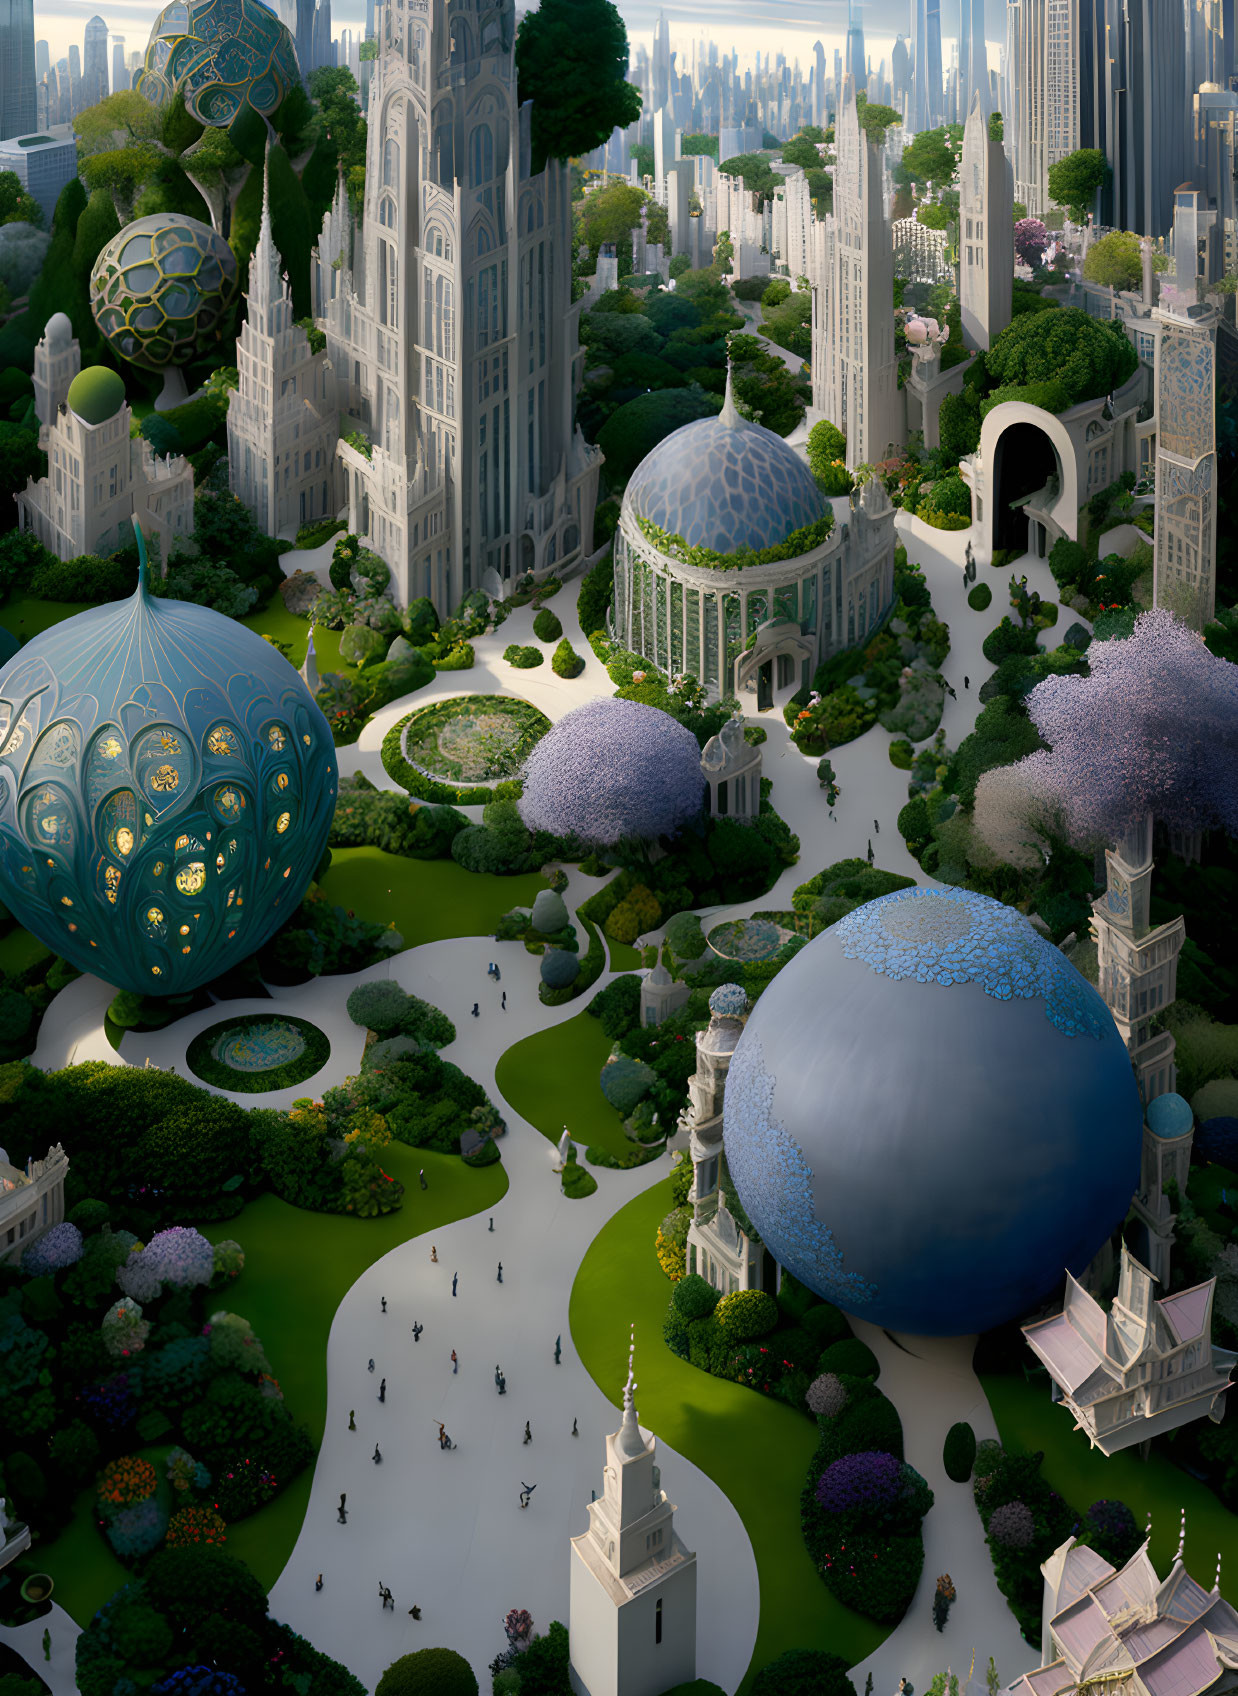 Fantastical cityscape with organic-shaped buildings and lush greenery